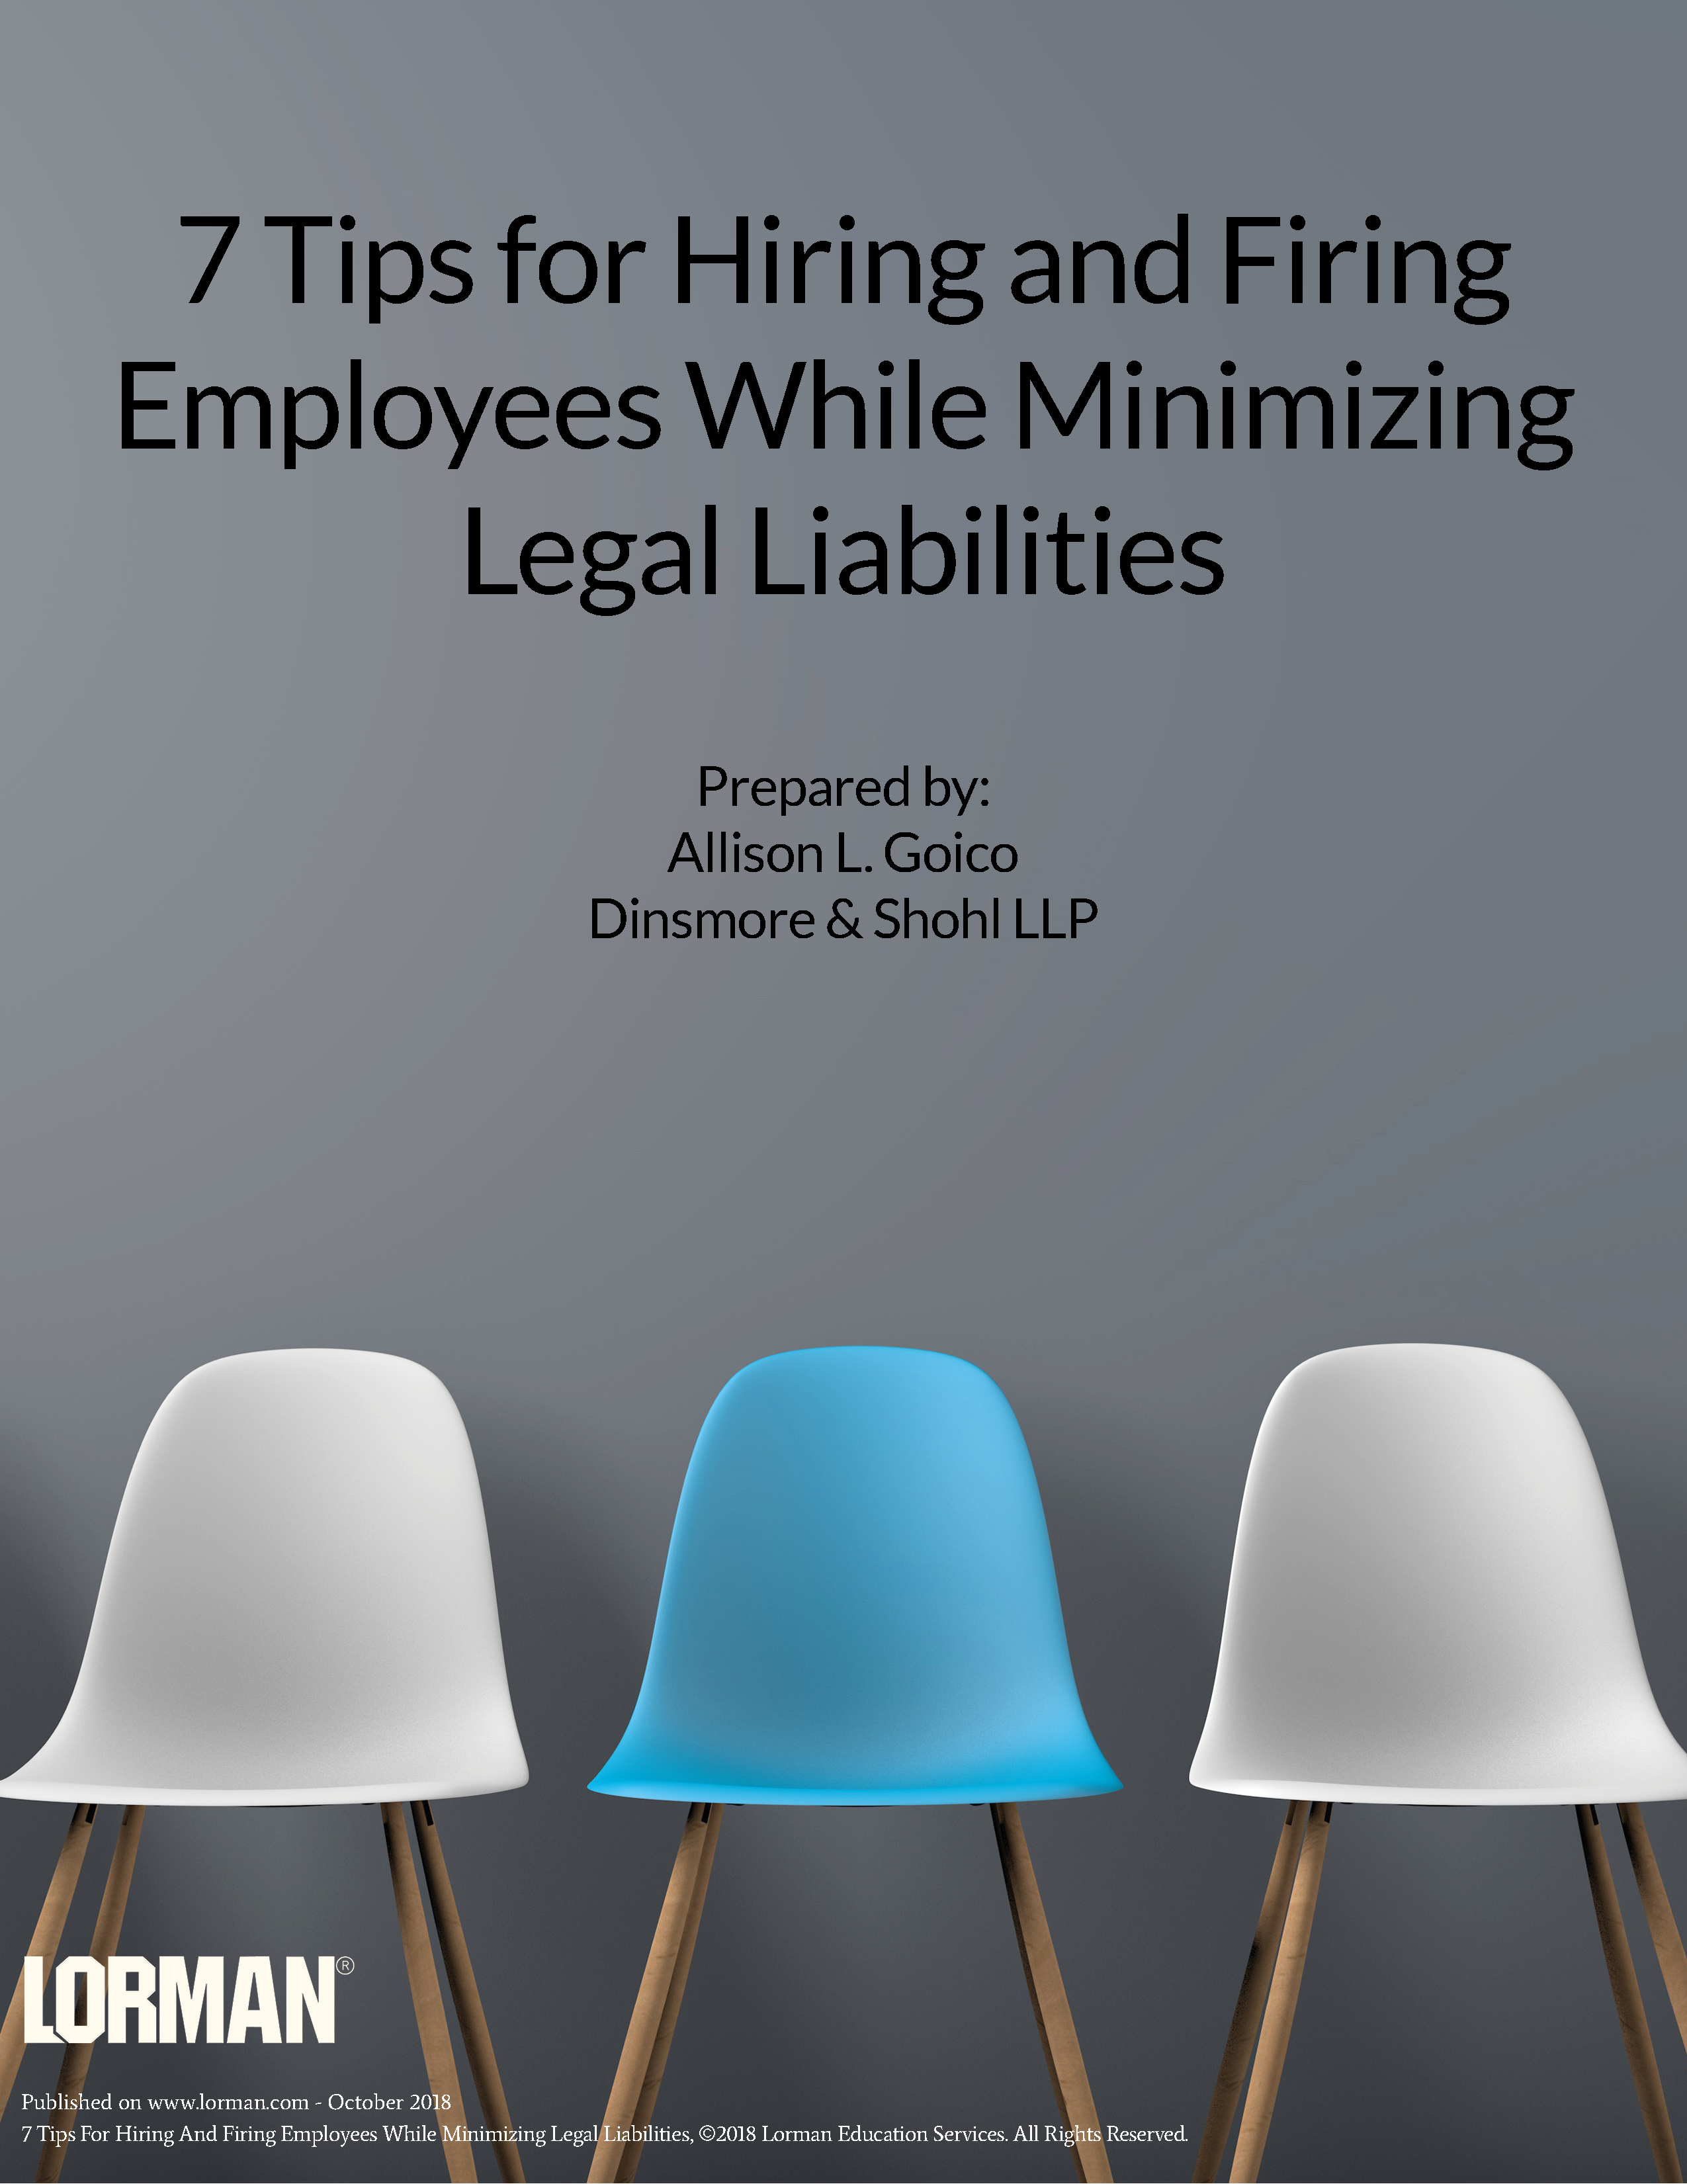 7 Tips For Hiring And Firing Employees While Minimizing Legal Liabilities